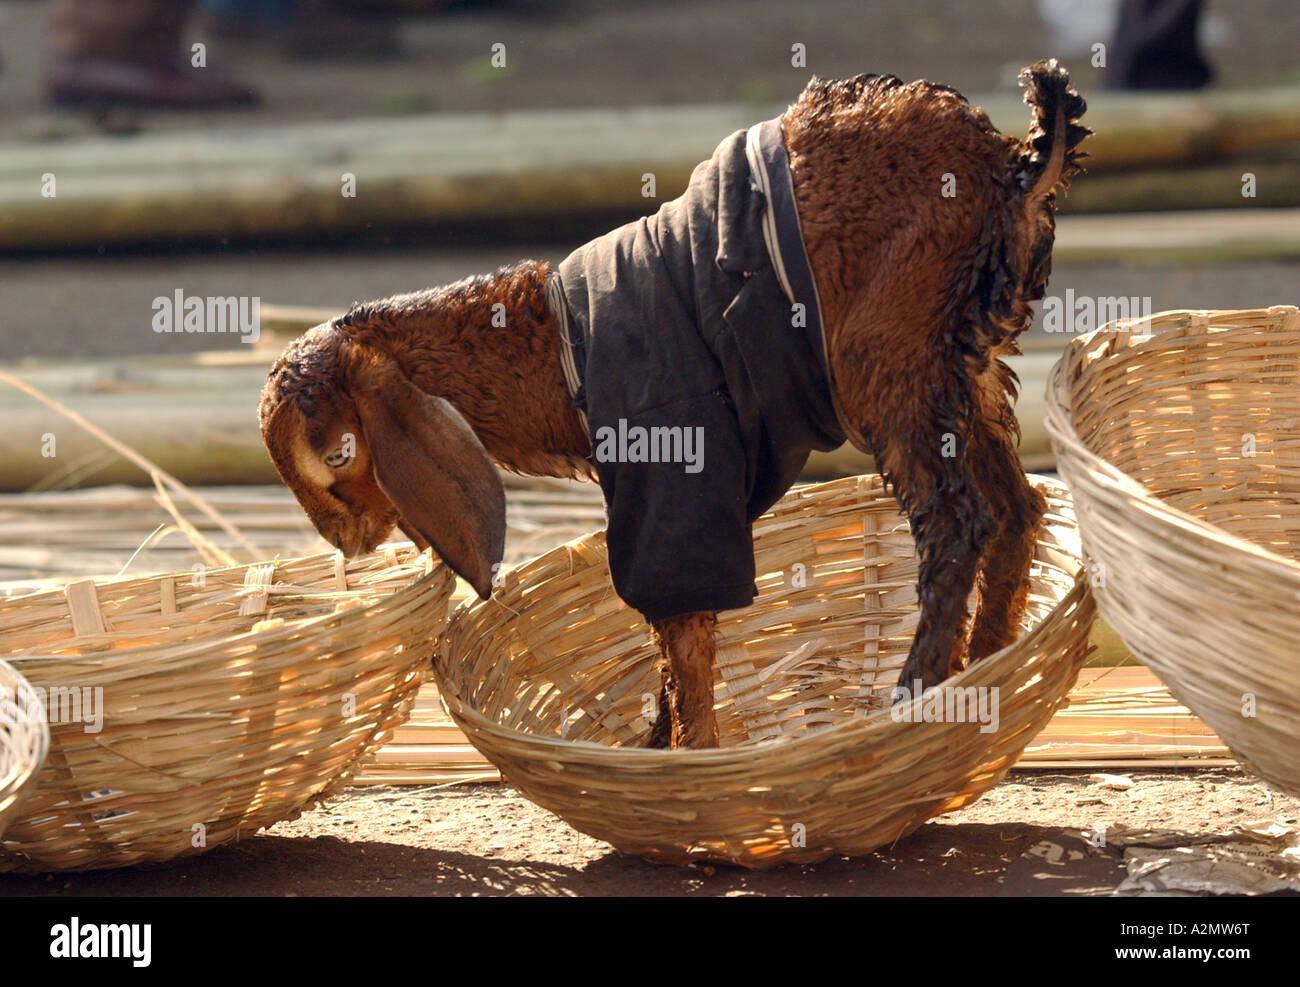 Young goat stands in a woven basket in Udaipur s spice and vegetable market India Stock Photo